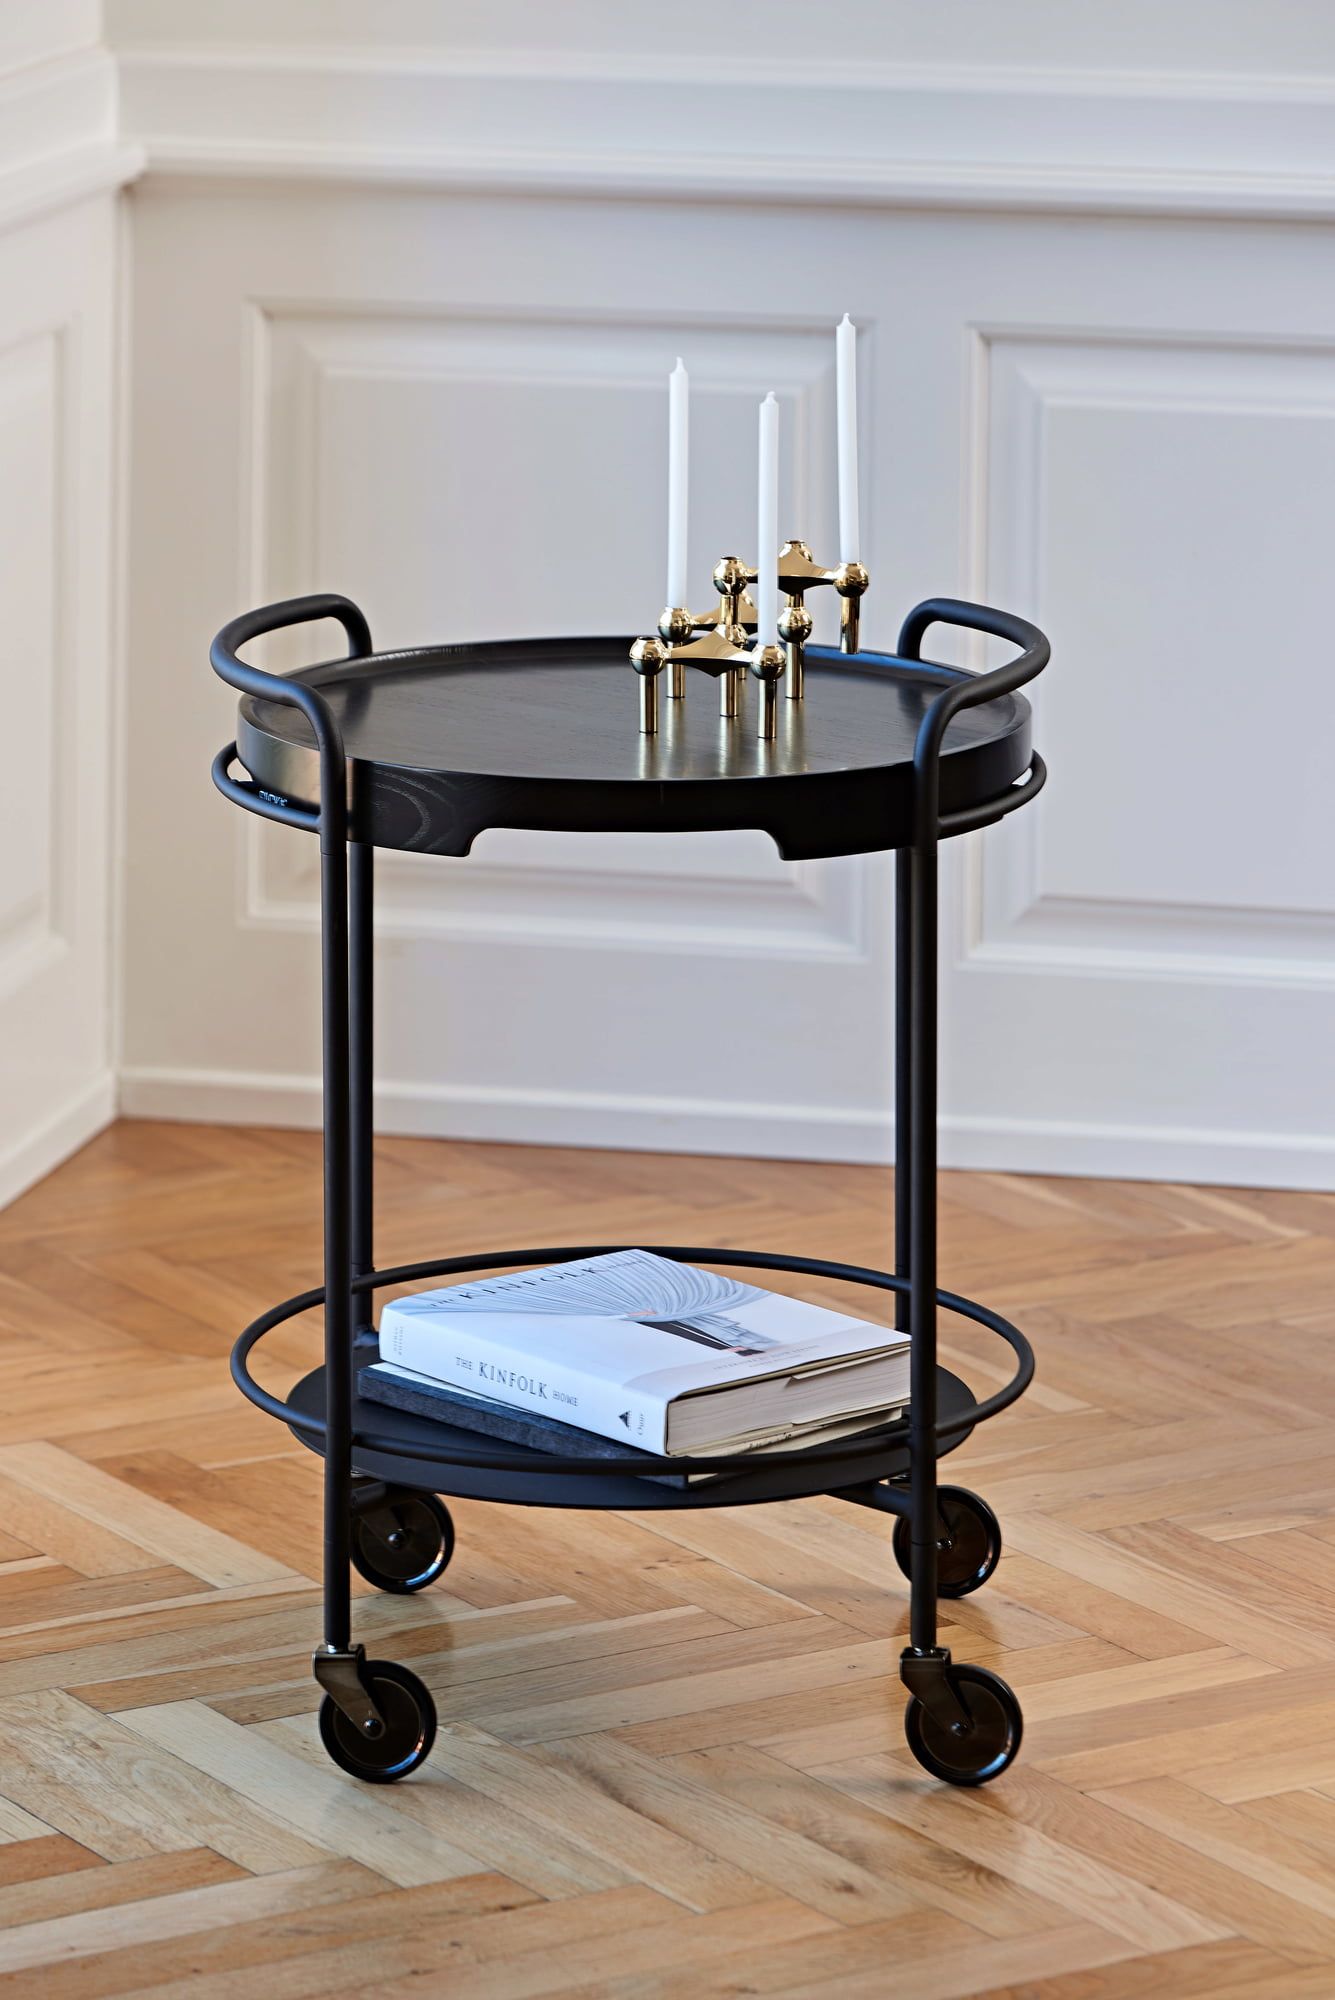 SACKit SERVEit Tray table - Interismo Online Shop Global